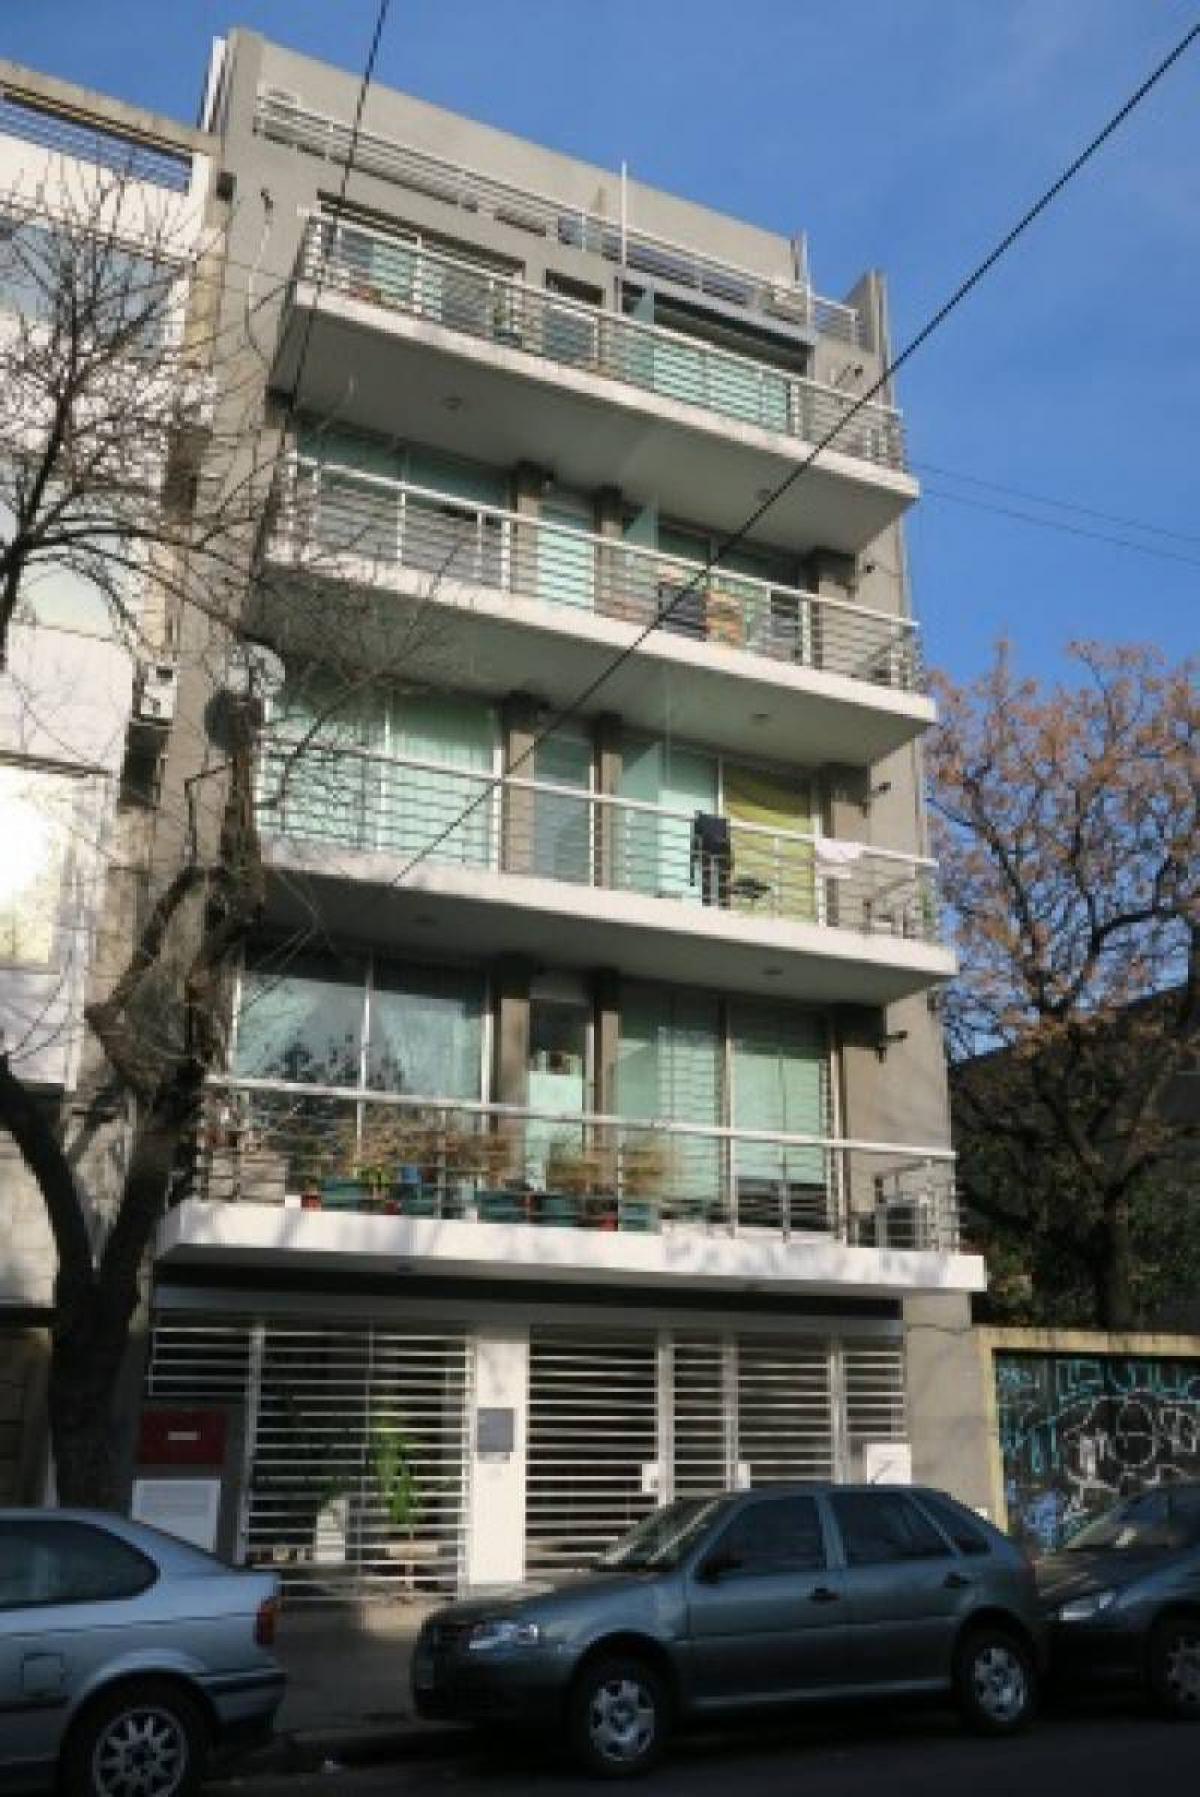 Picture of Office For Sale in Palermo, Distrito Federal, Argentina